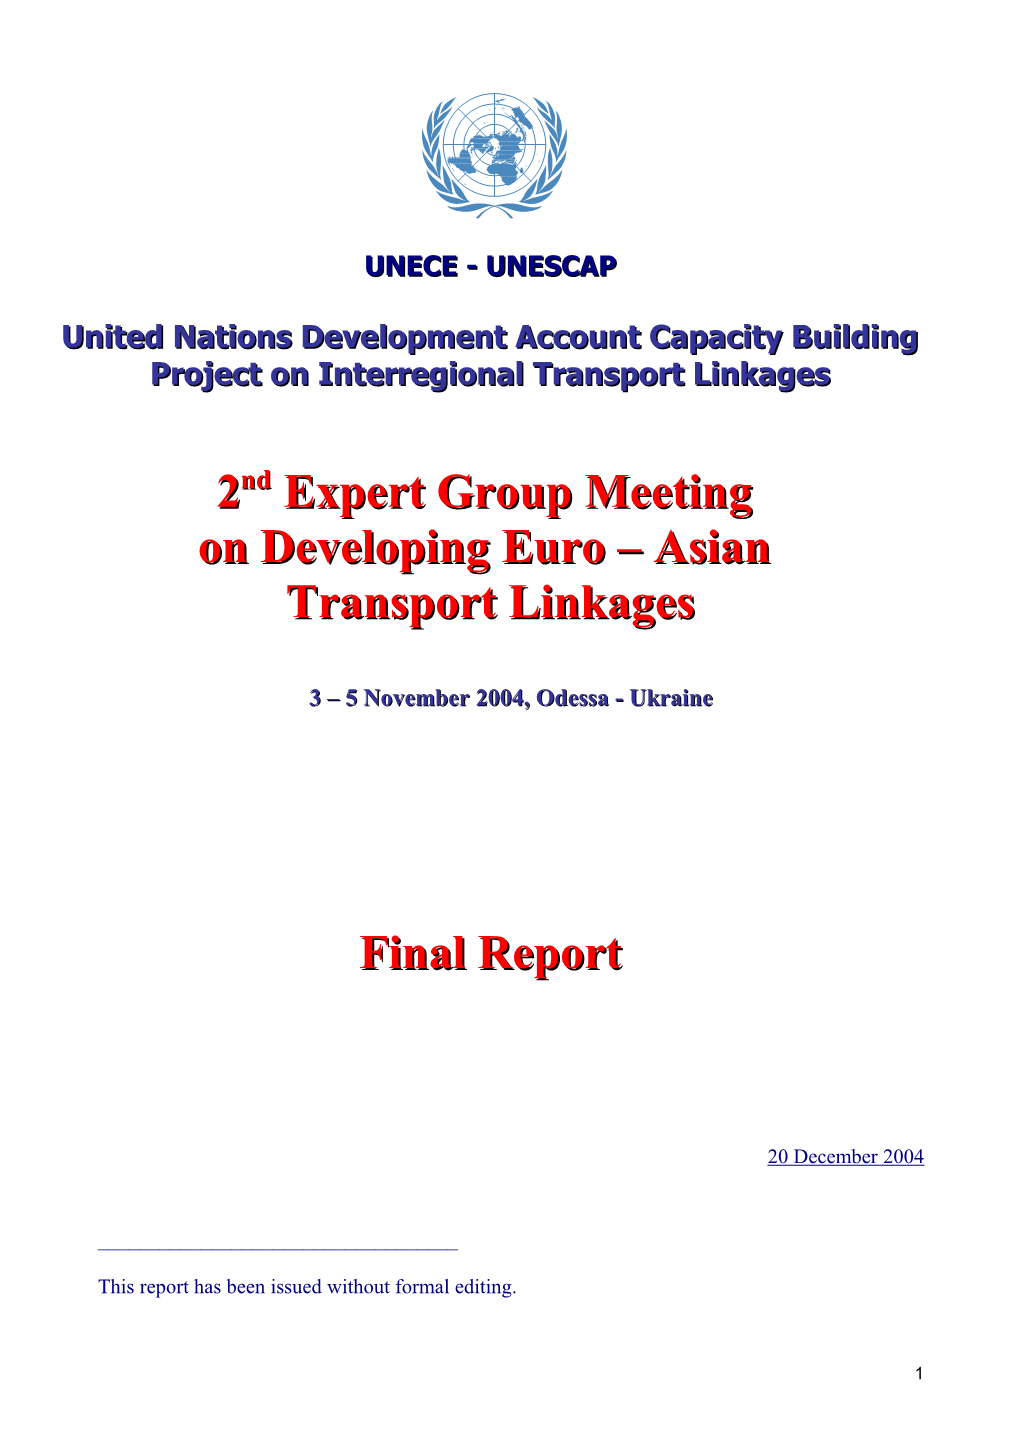 United Nations Development Account Capacity Building Project on Interregional Transport